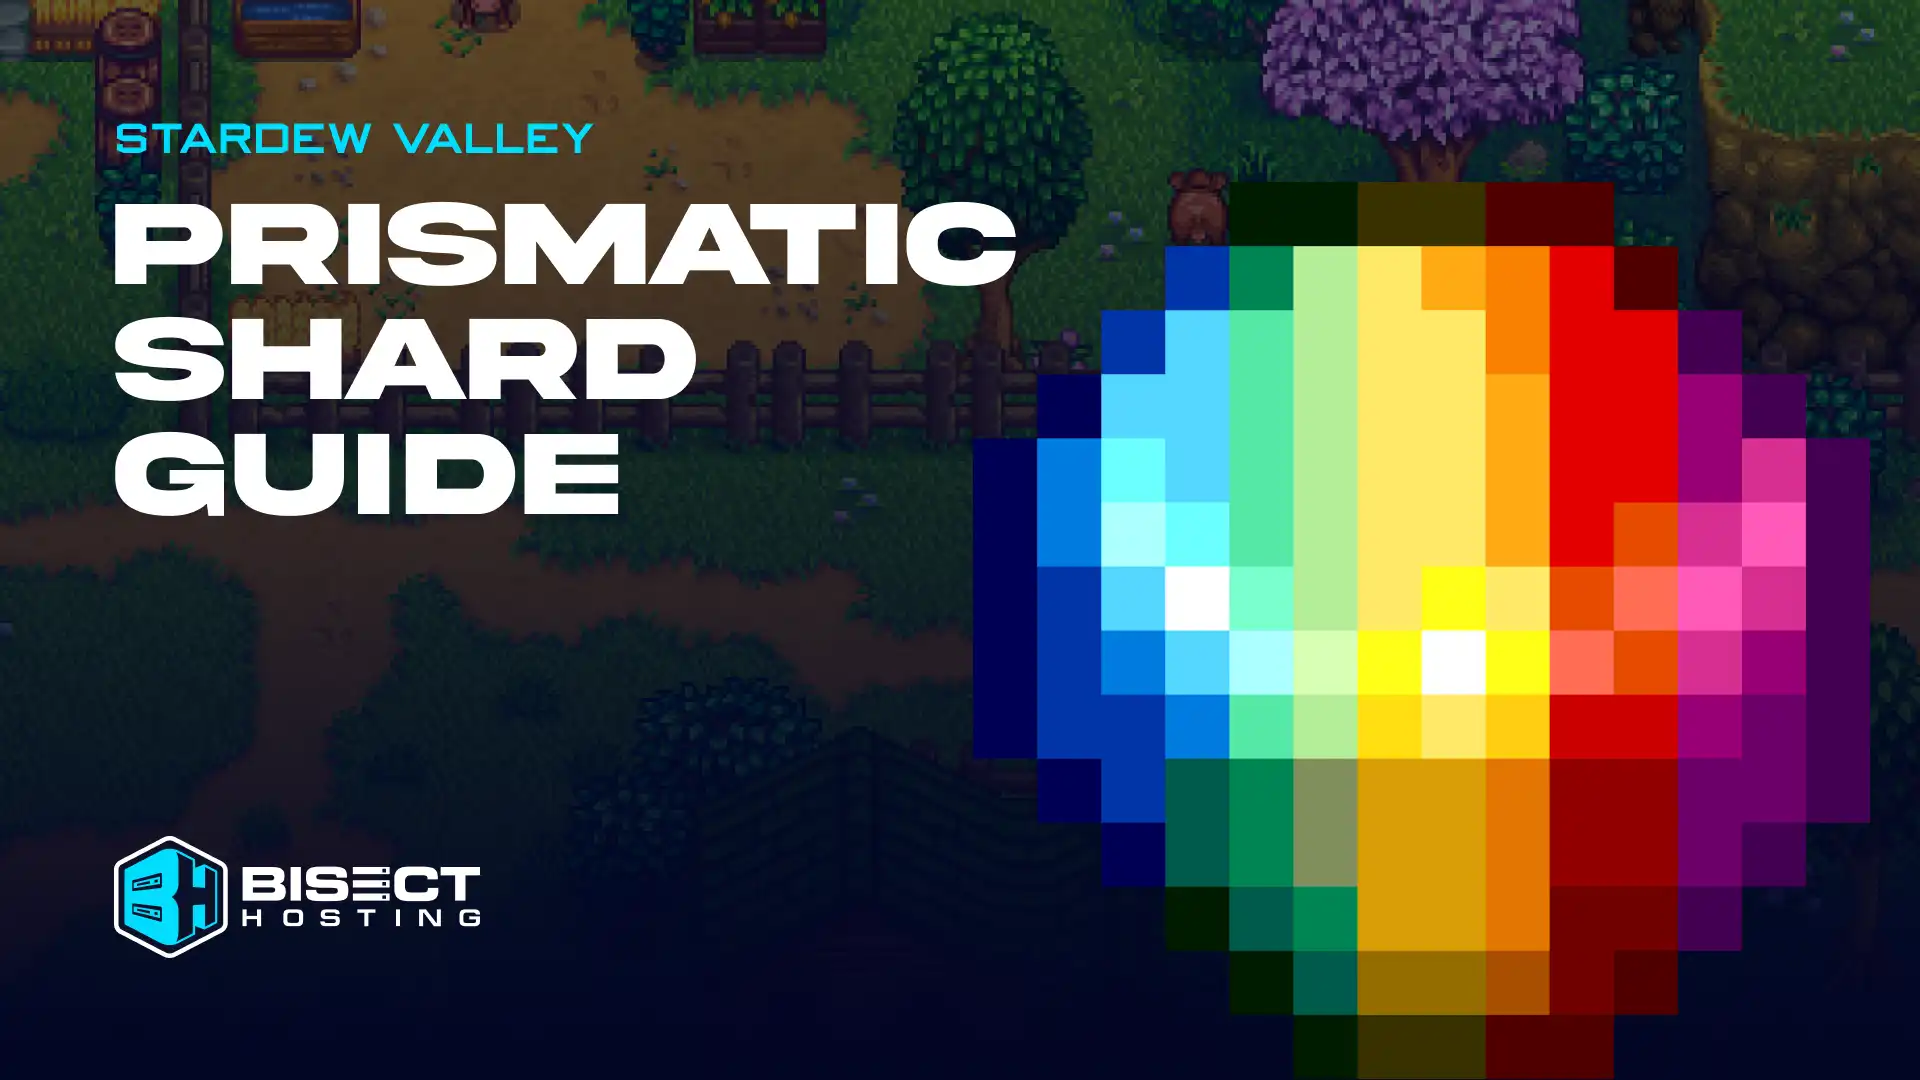 Stardew Valley Prismatic Shard Guide: Locations, Drop Chances, How to Get, and All Uses